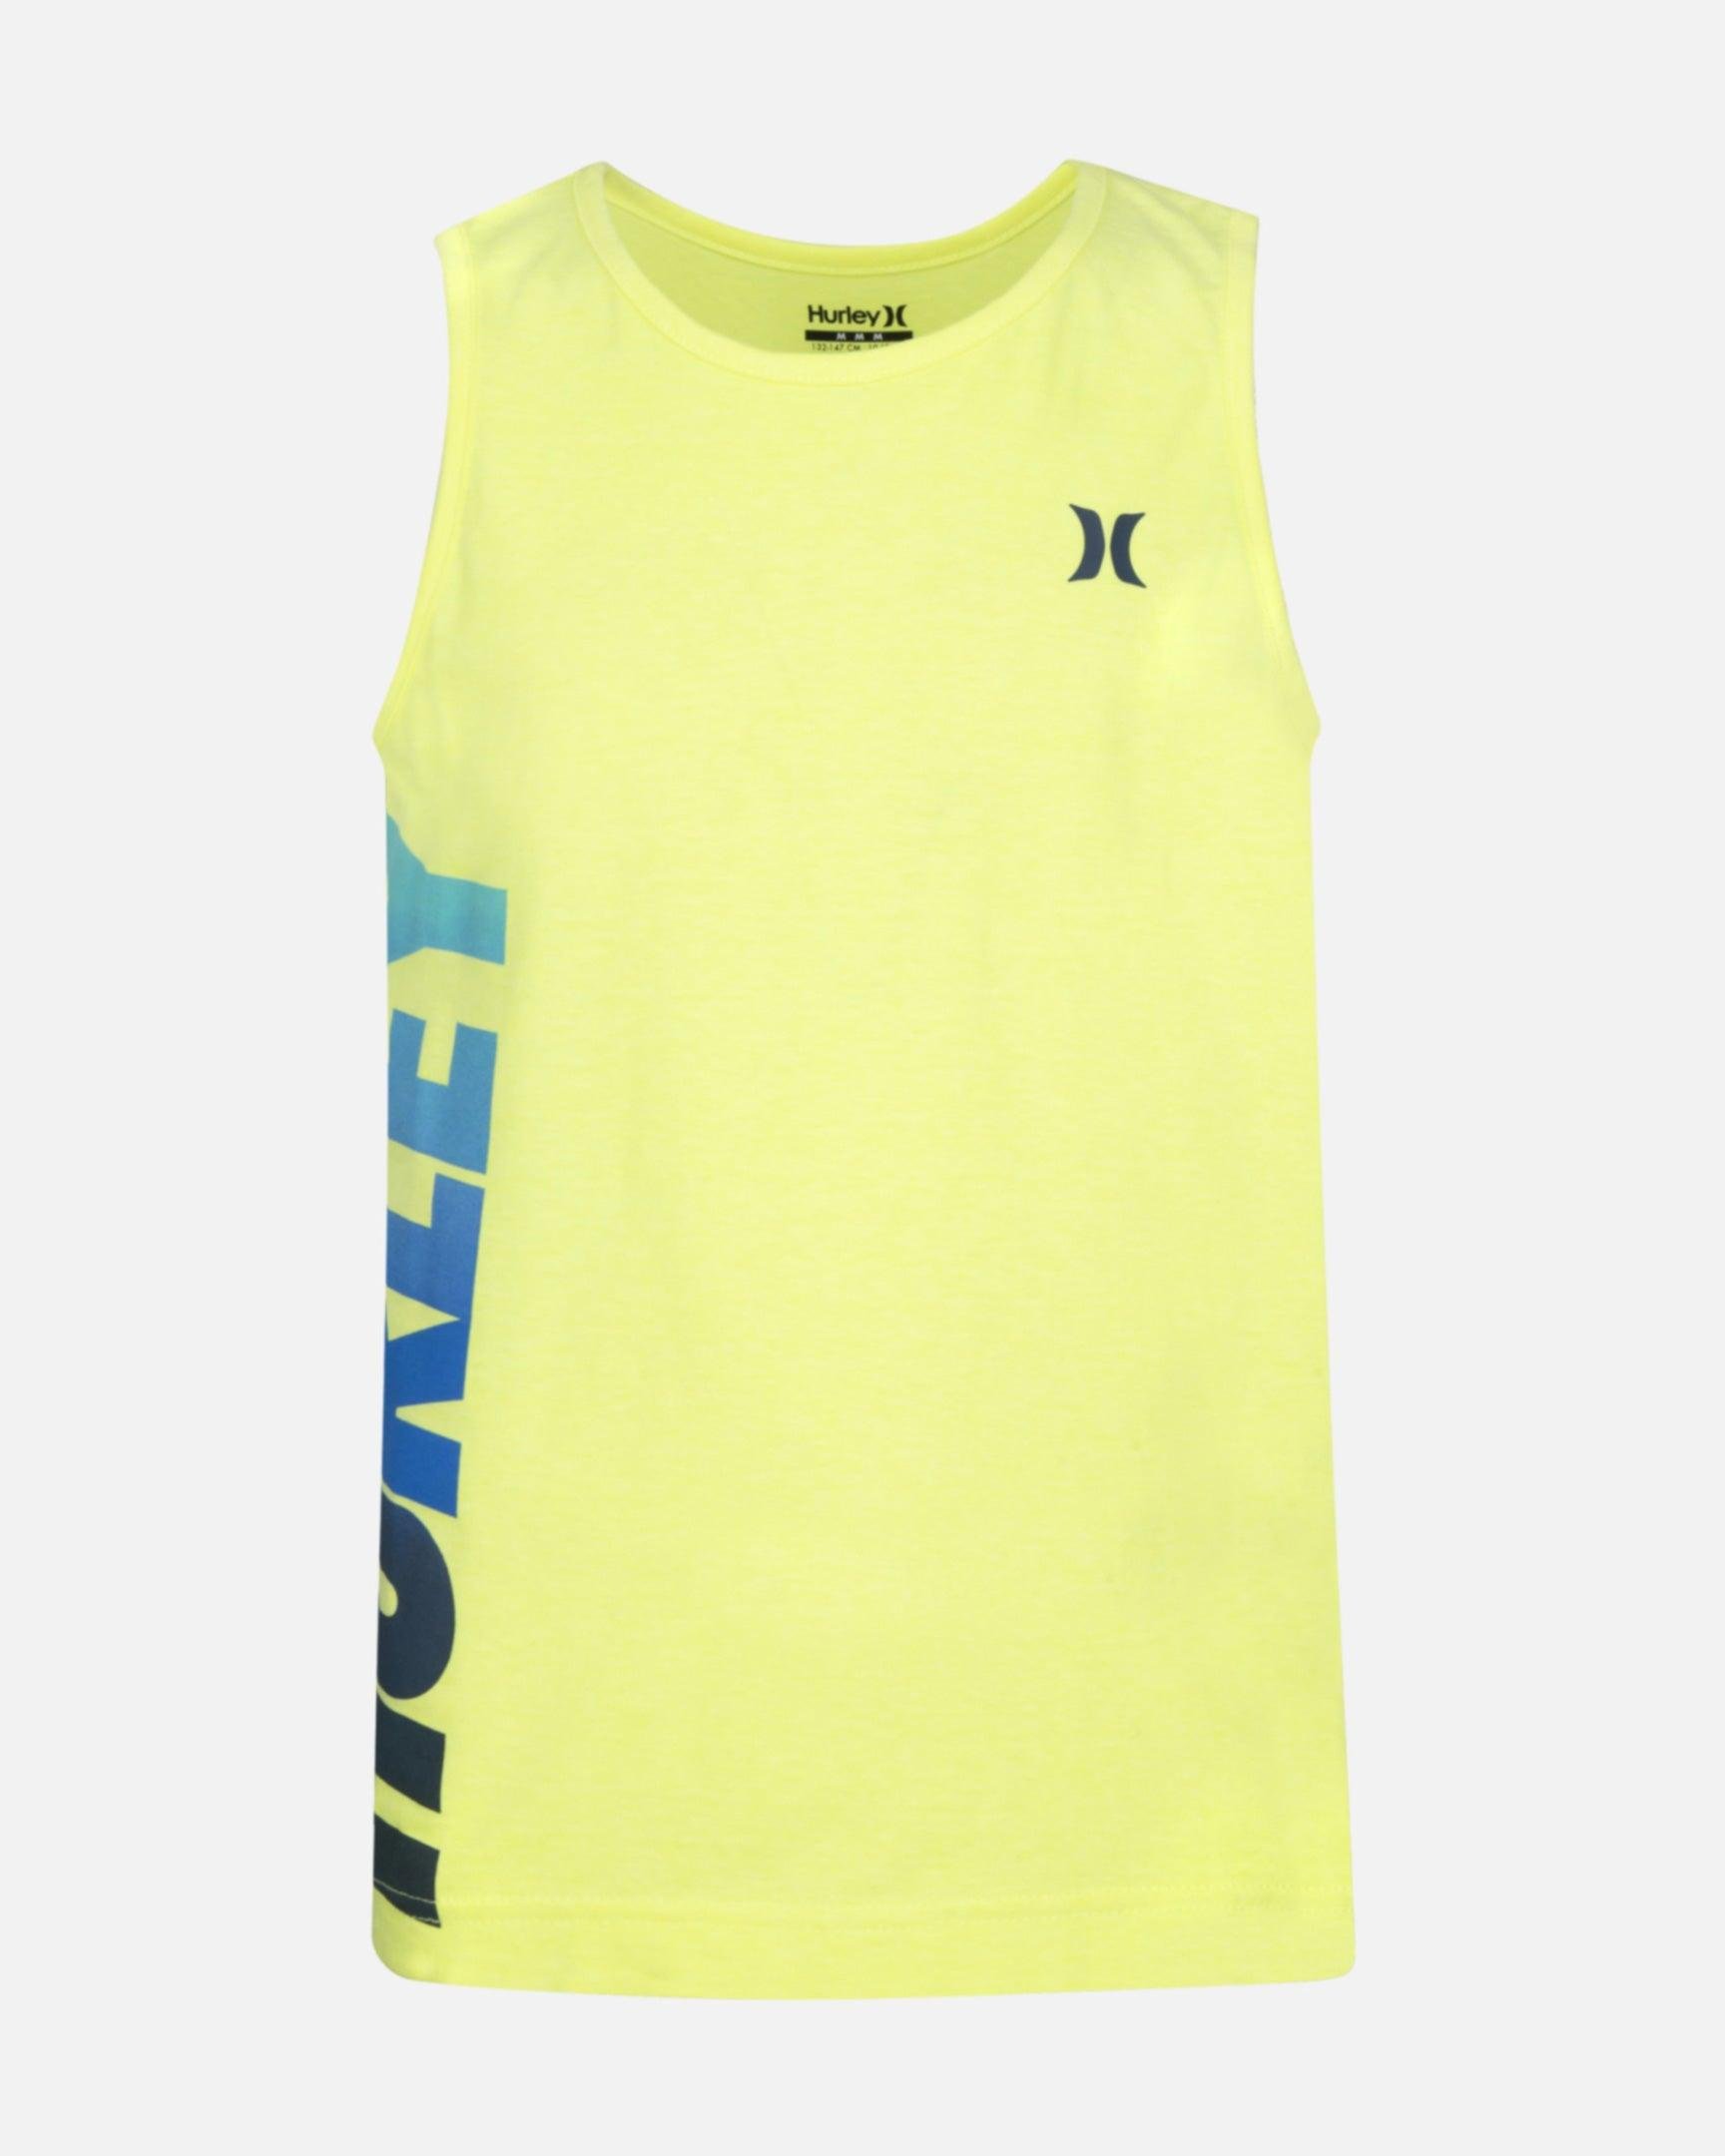 Boys Graphic Tank Top by HURLEY